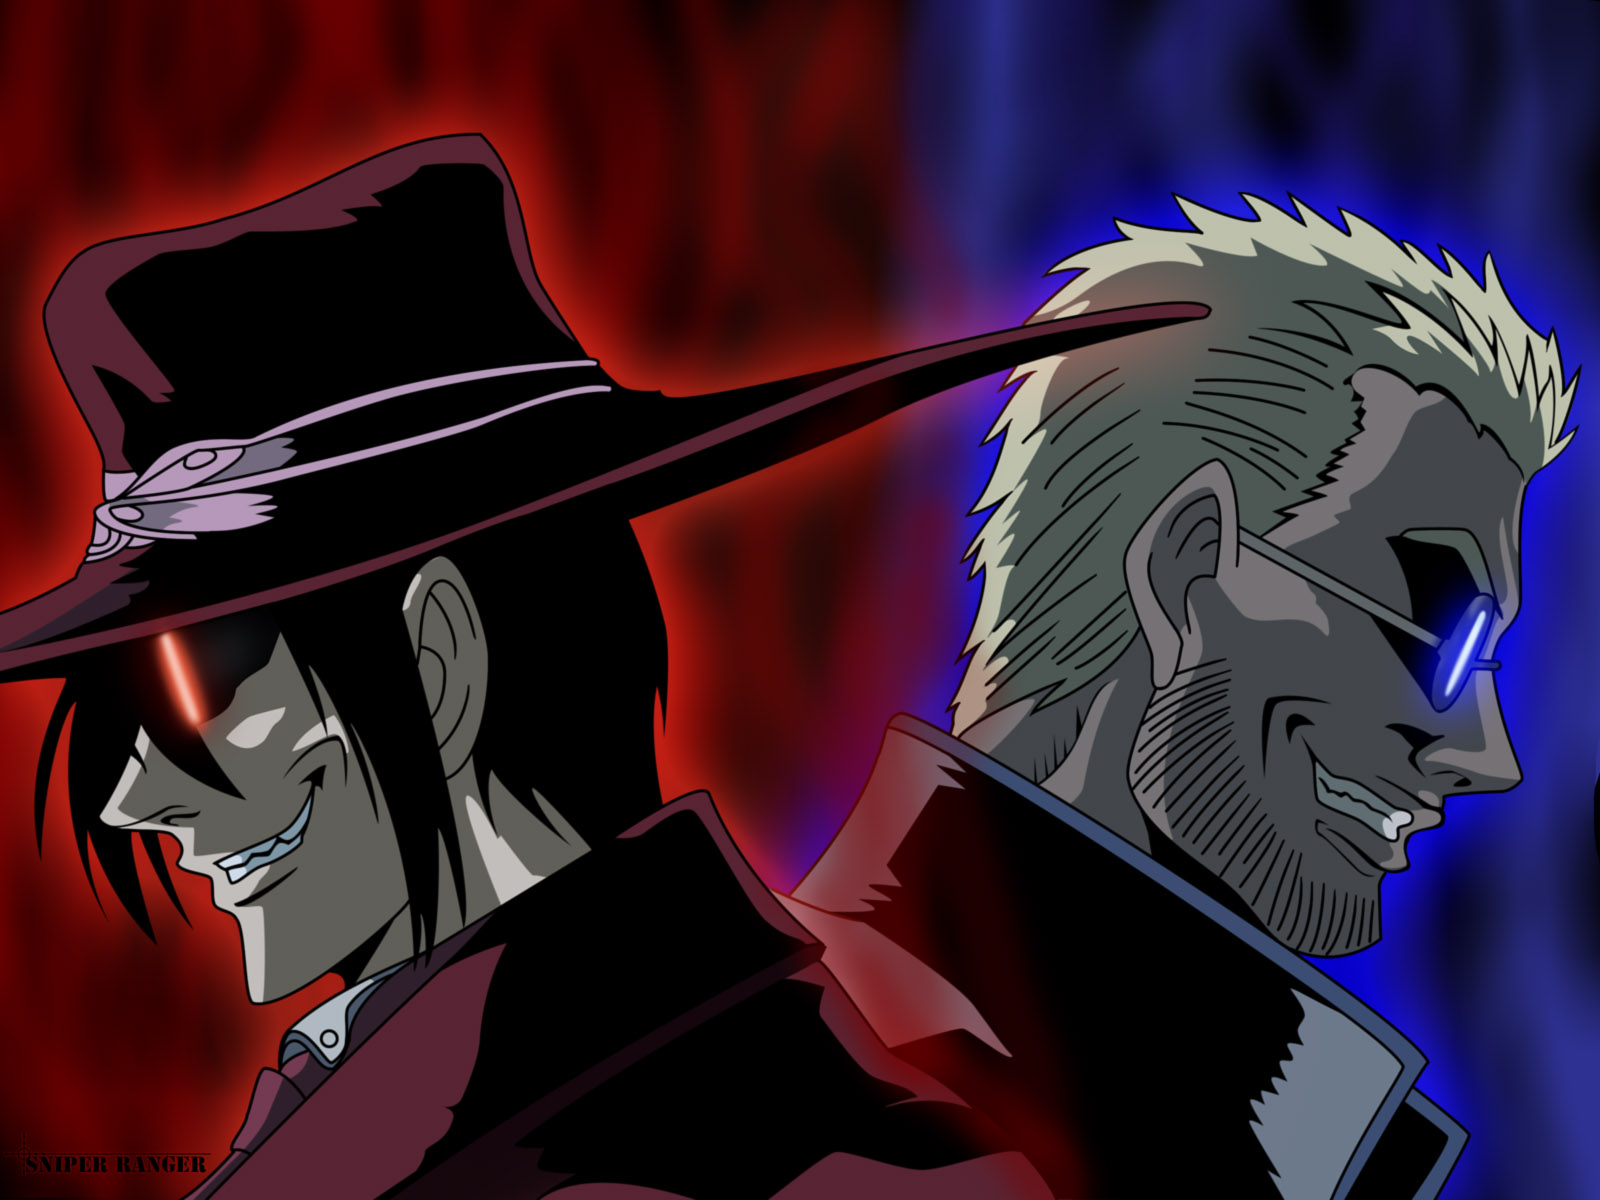 Alexander Anderson :: hellsing :: anime :: fandoms / new / funny posts,  pictures and gifs on JoyReactor